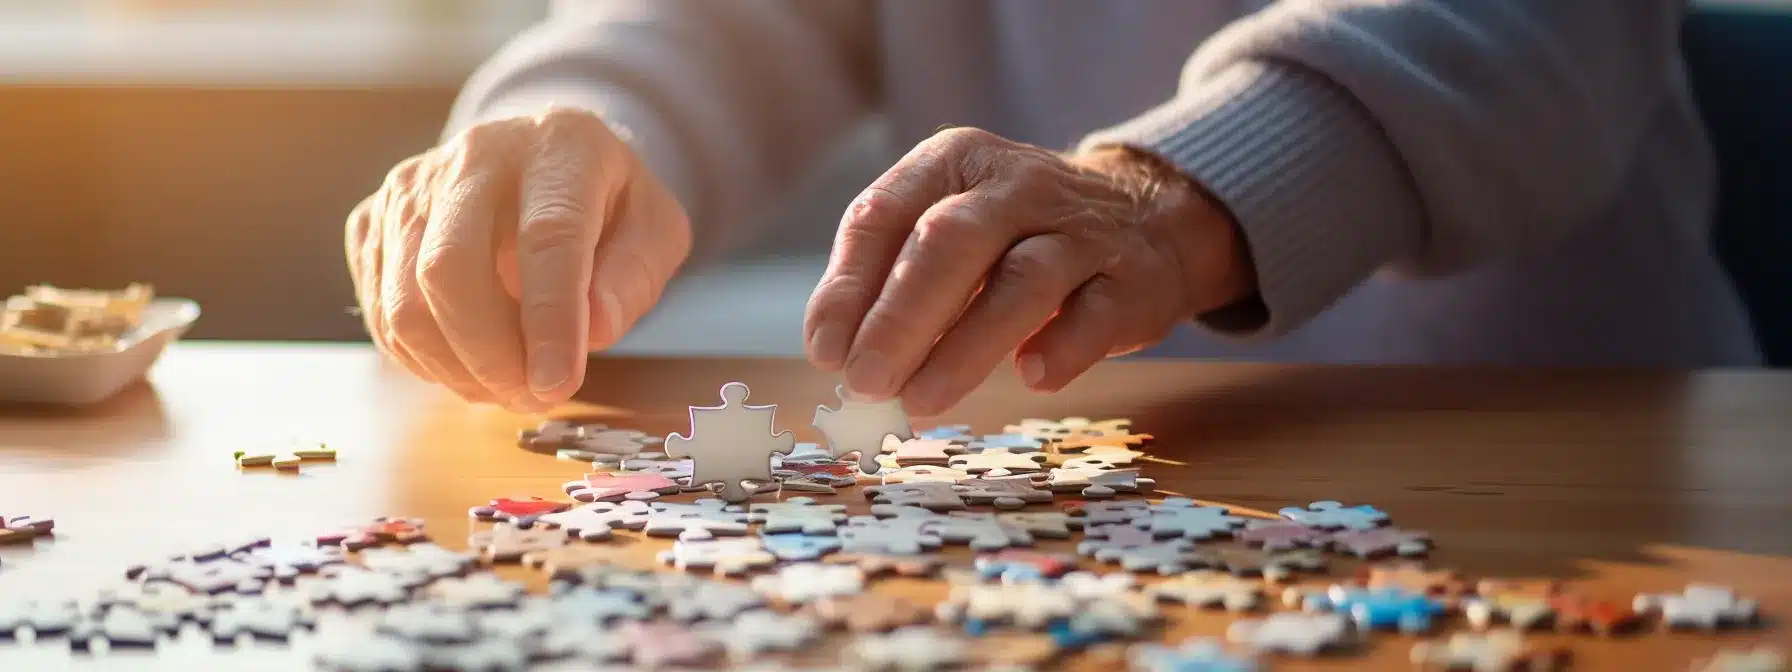 A Person Carefully Selecting And Arranging Jigsaw Puzzle Pieces To Create Their Brand Identity.